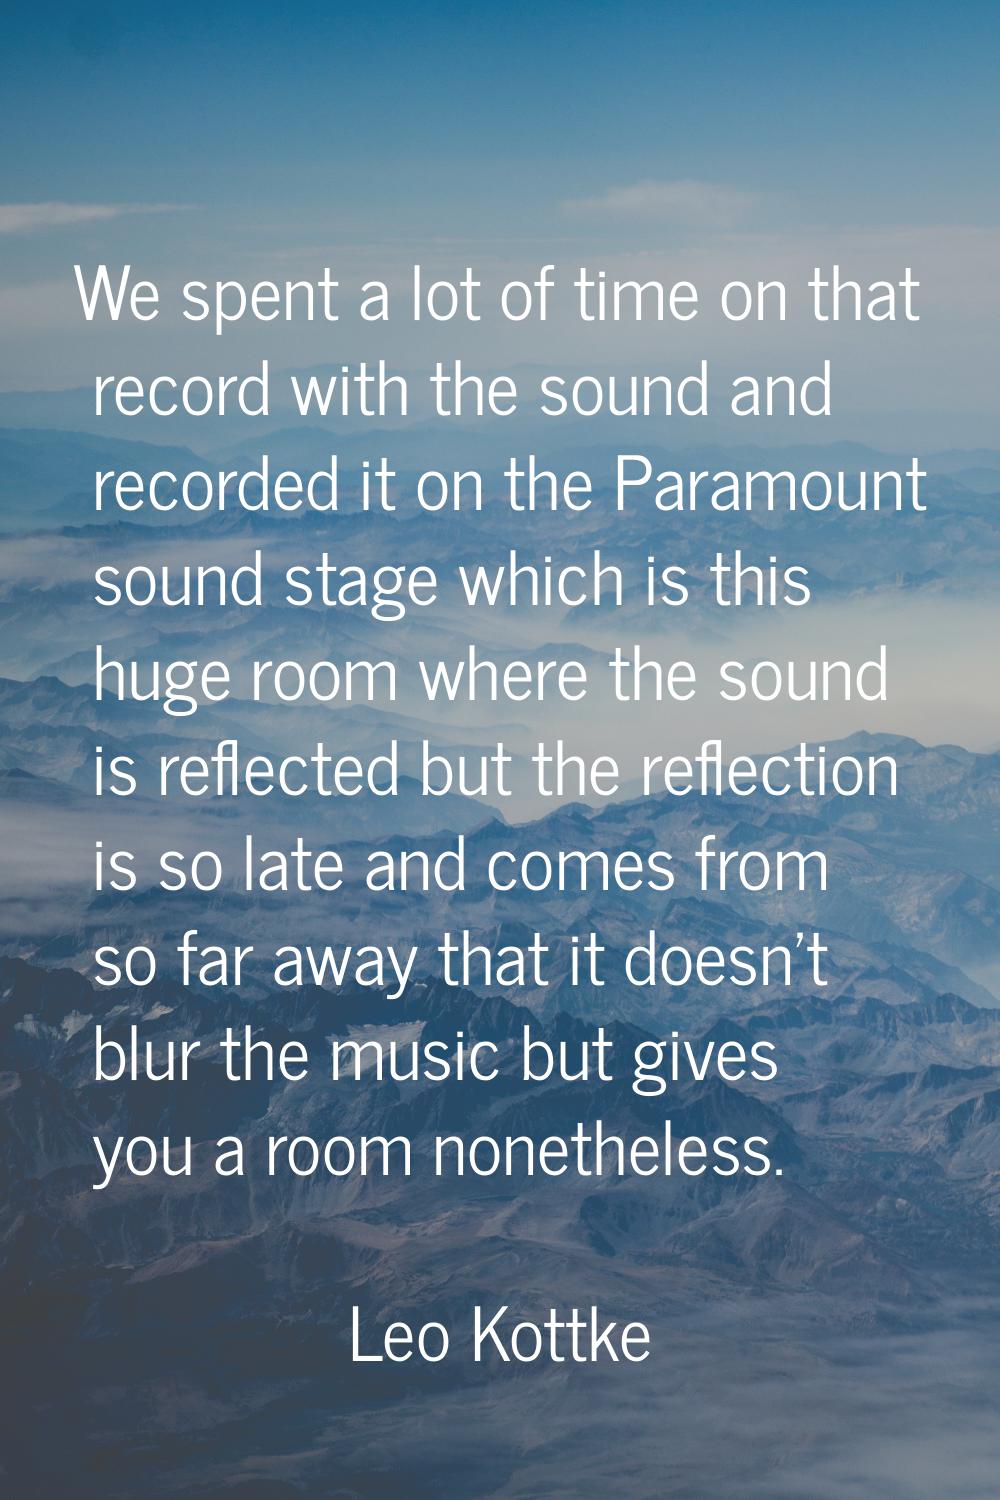 We spent a lot of time on that record with the sound and recorded it on the Paramount sound stage w